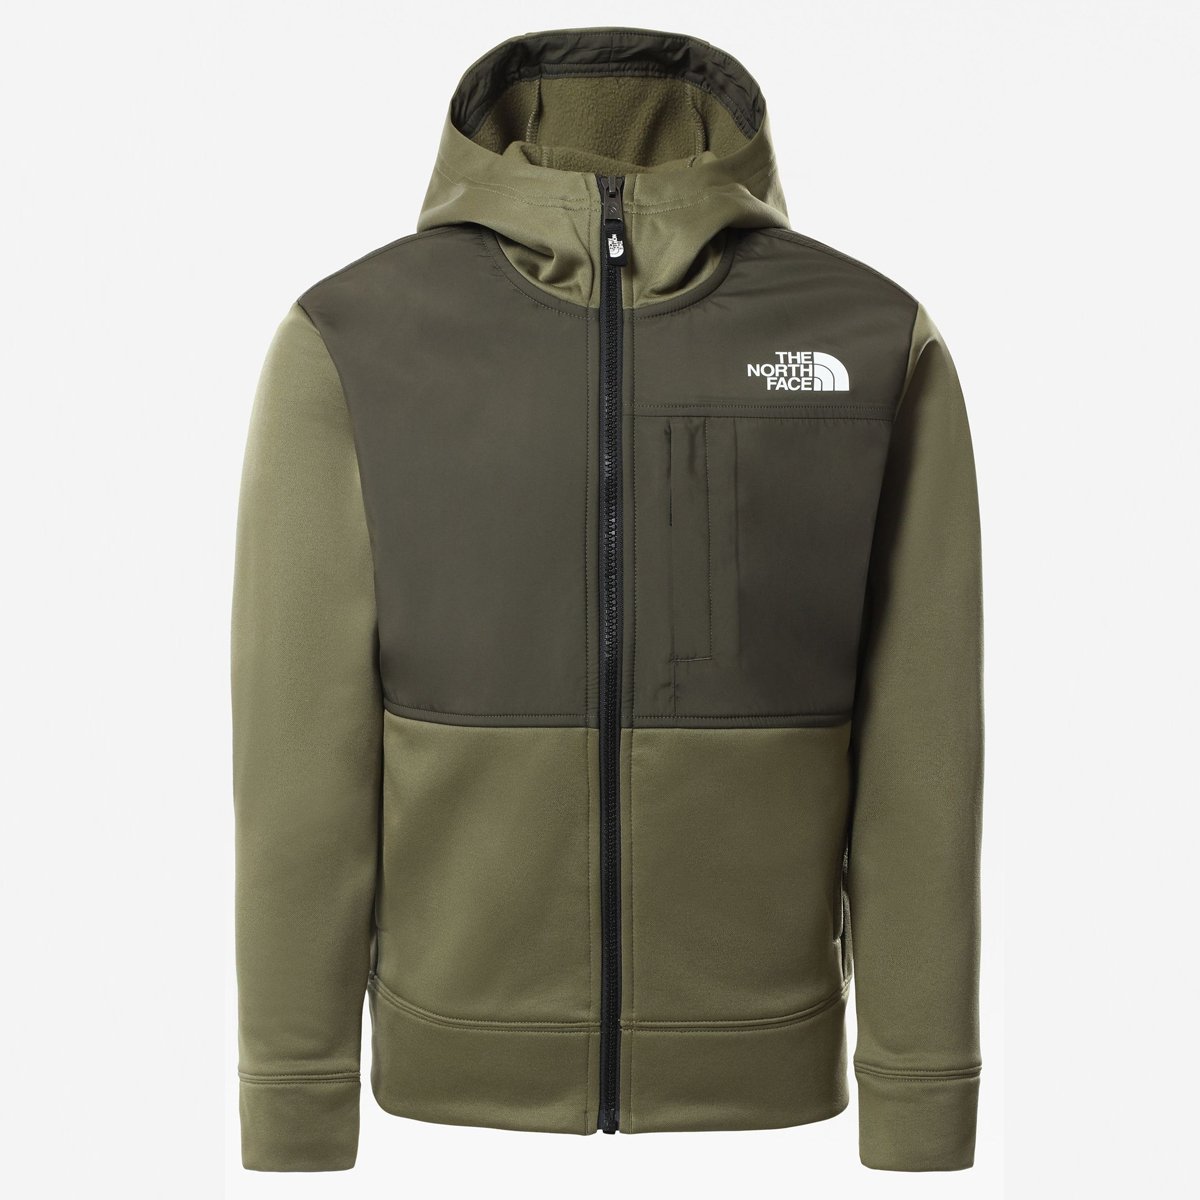 The North Face Youth Surgent Full Zip Hoodie, from £60